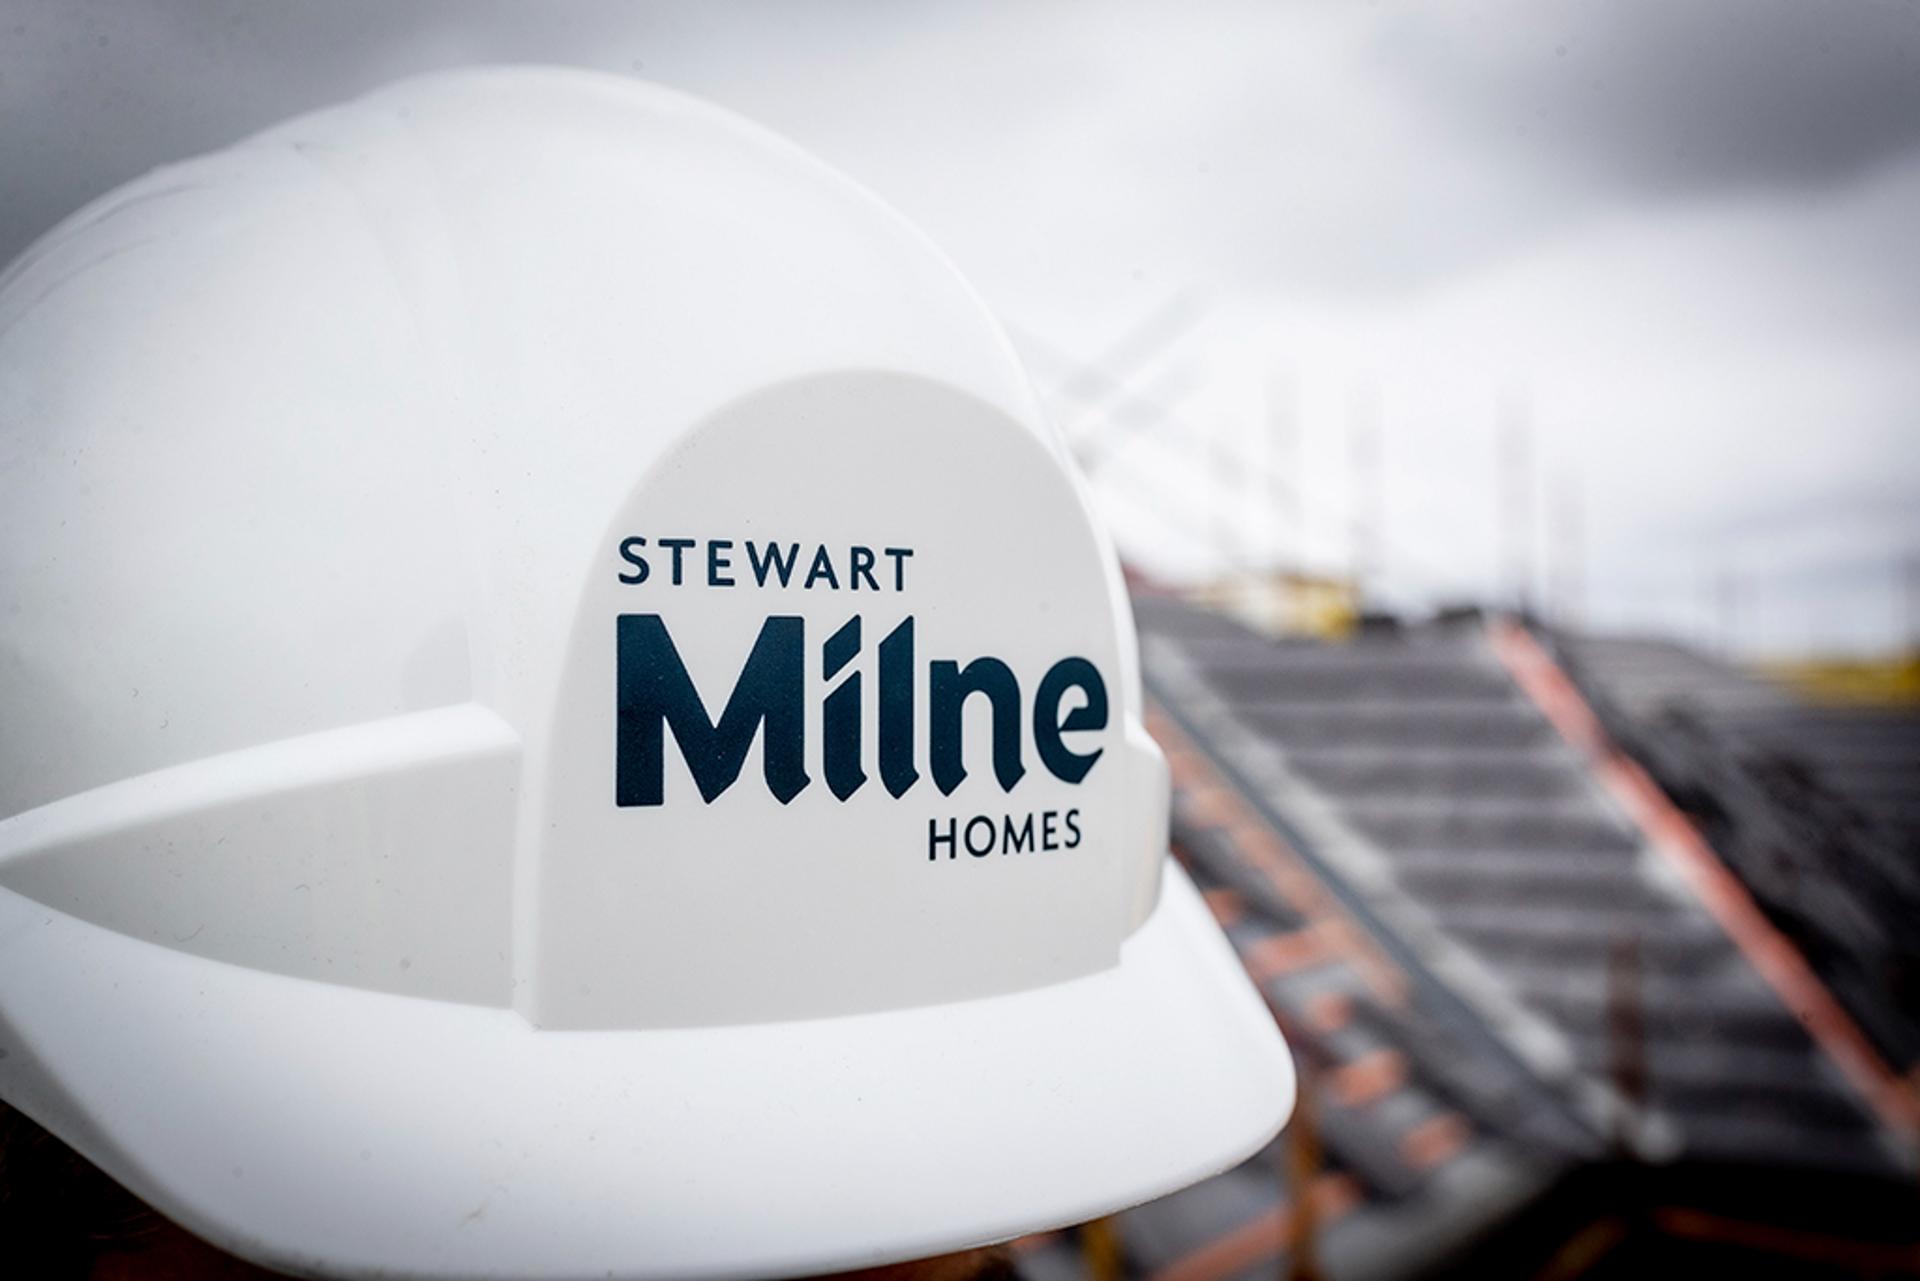 Stewart Milne Group enters administration after sale process flounders